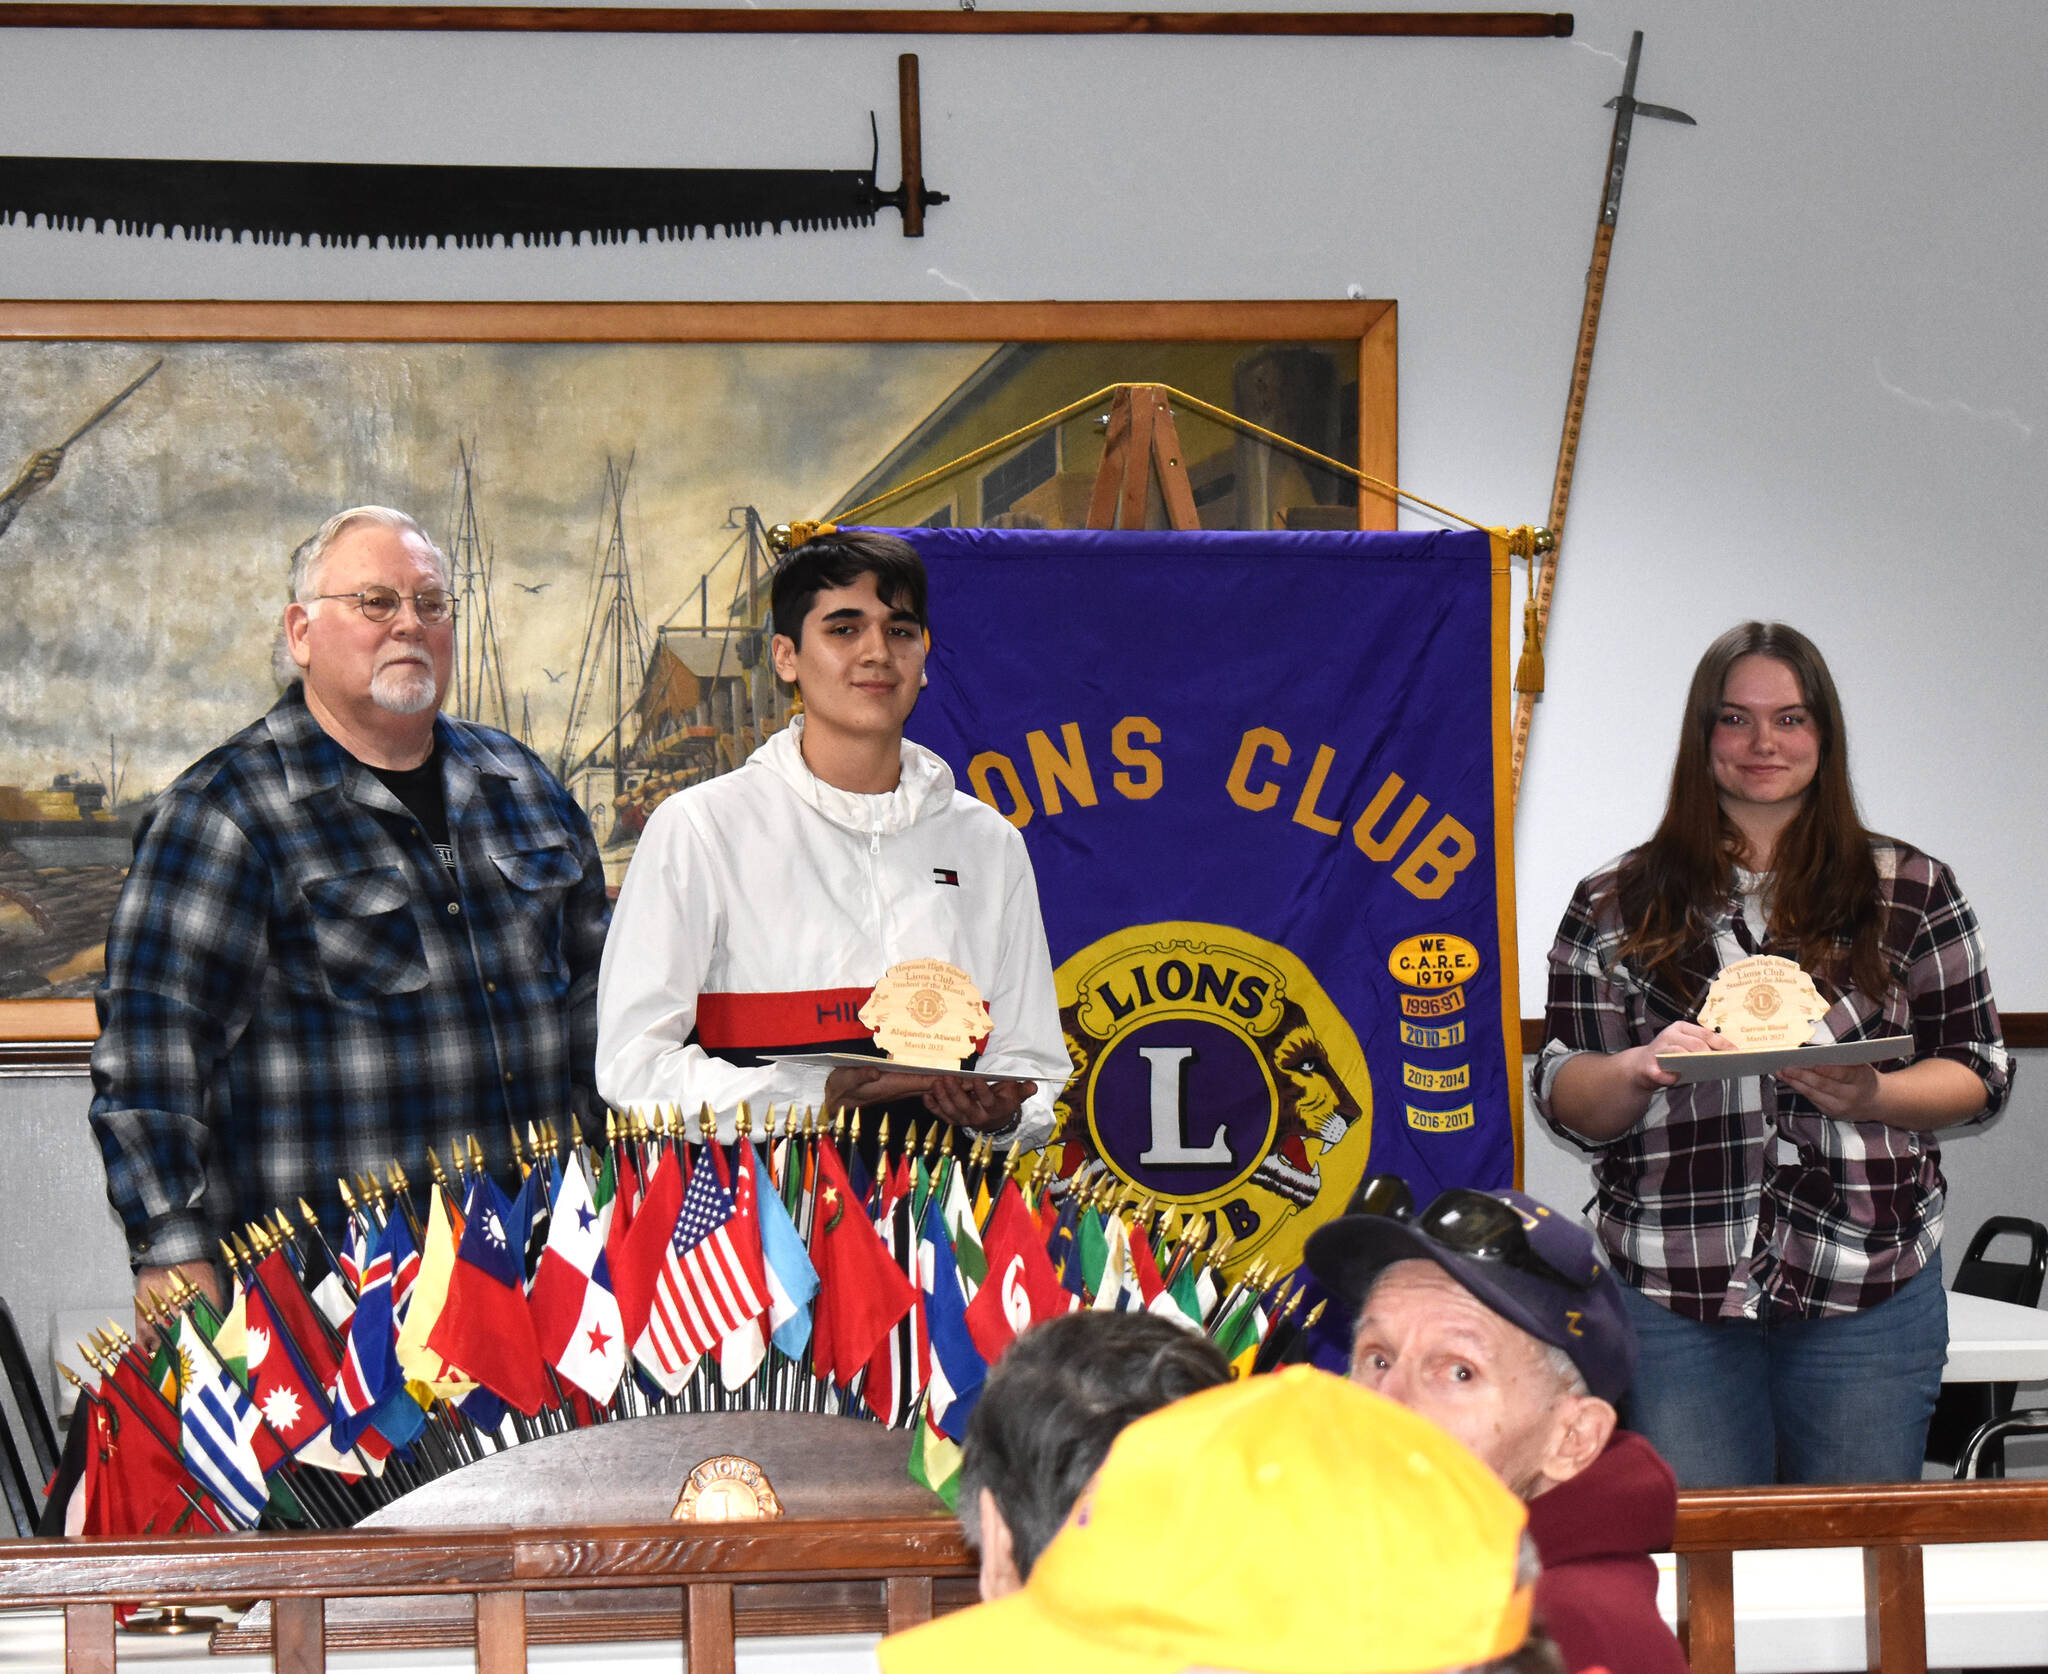 Gerald Schaefer, left, stands with Alejandro Atwell and Carron Blood on Tuesday. The pair of senior Hoquiam High School students received “Student of the Month” awards from Hoquiam Lions Club in front of at least 100 attendees who were inside the Hoquiam Elks Lodge. Both students have at least an eye on attending Grays Harbor College in the future.
Matthew N. Wells
 / The Daily World